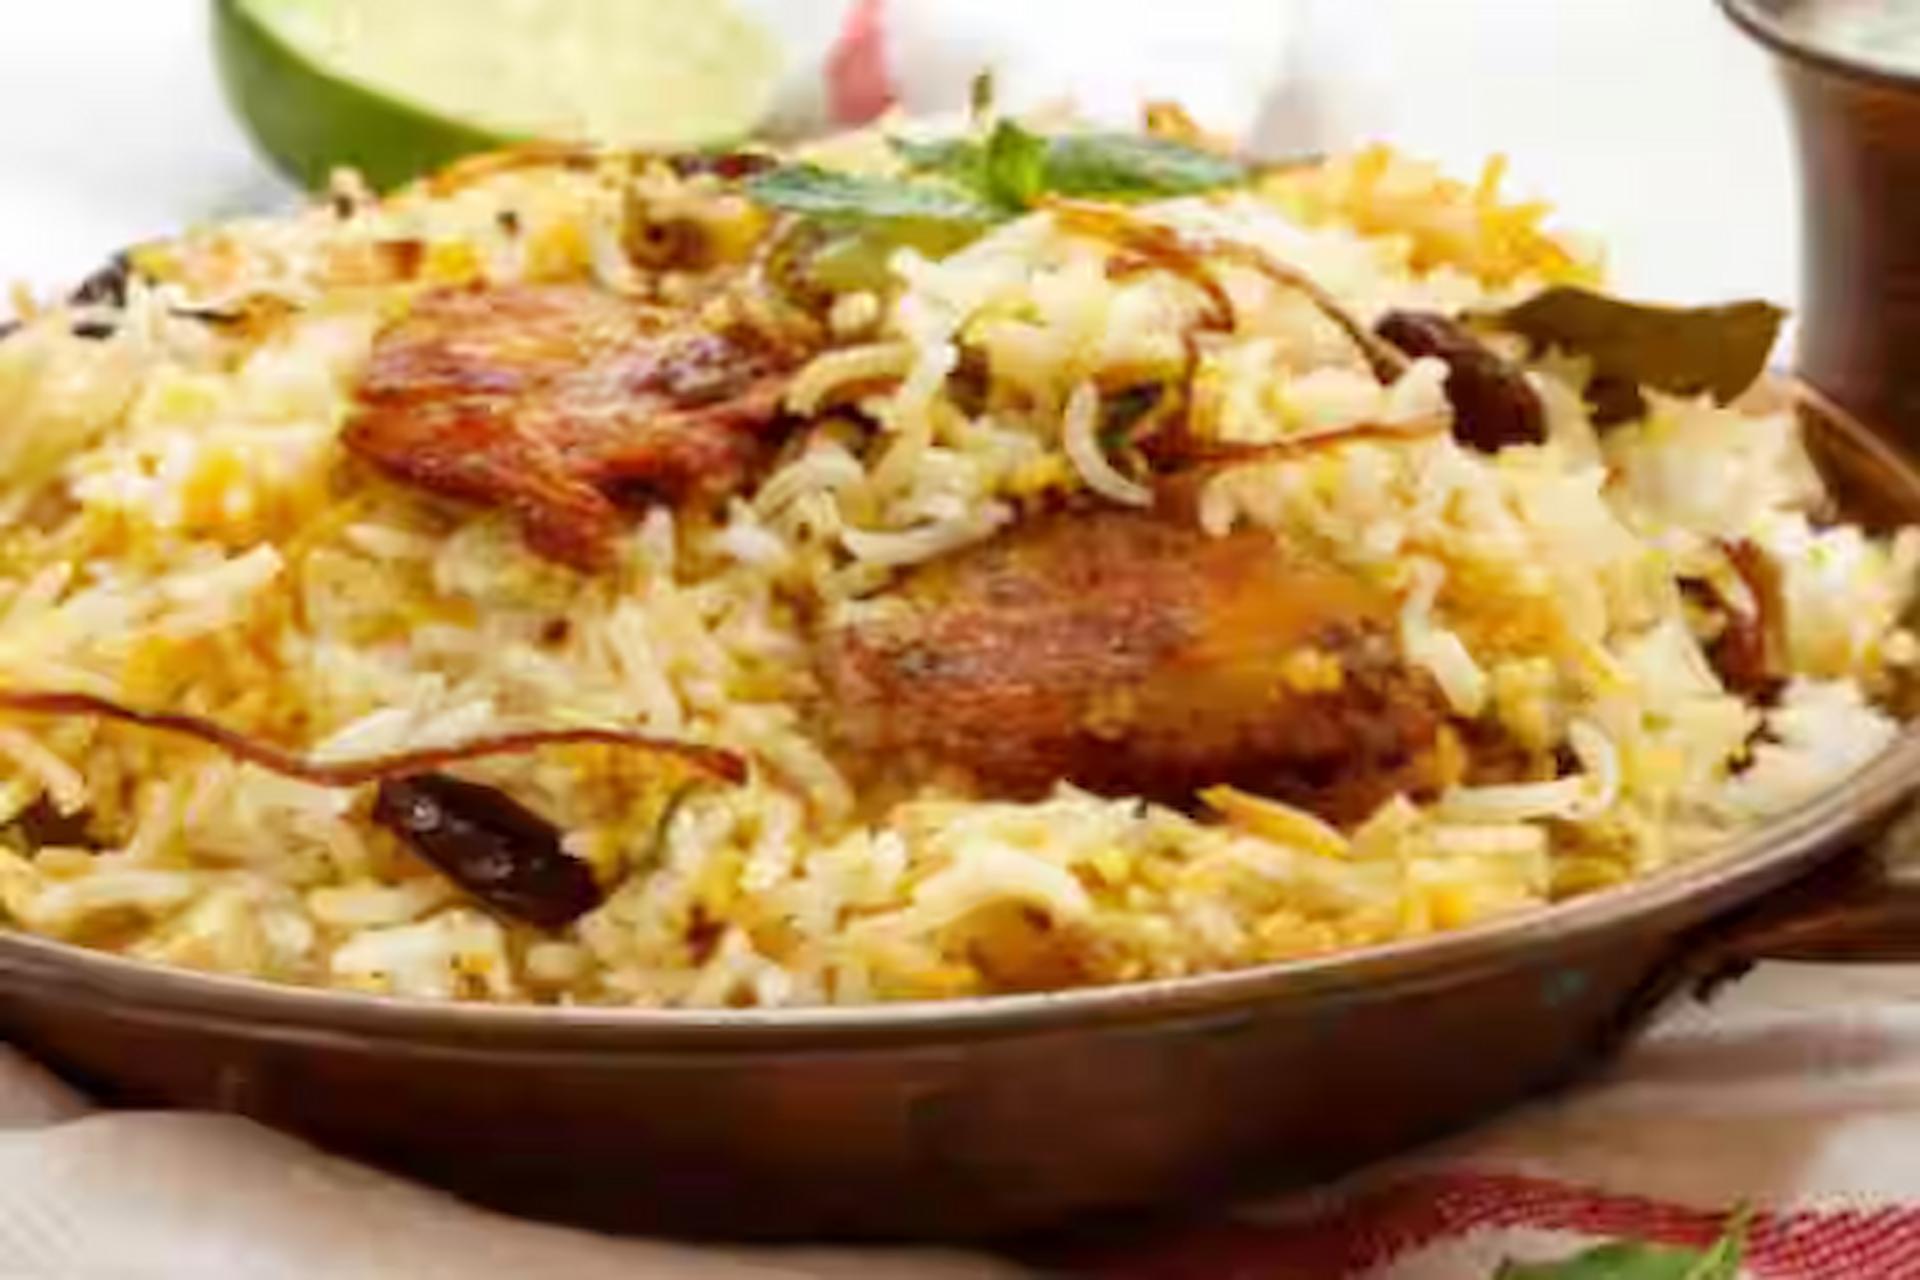 Topi Vappa Biriyani Franchise: A Route to Entrepreneurial Excellence